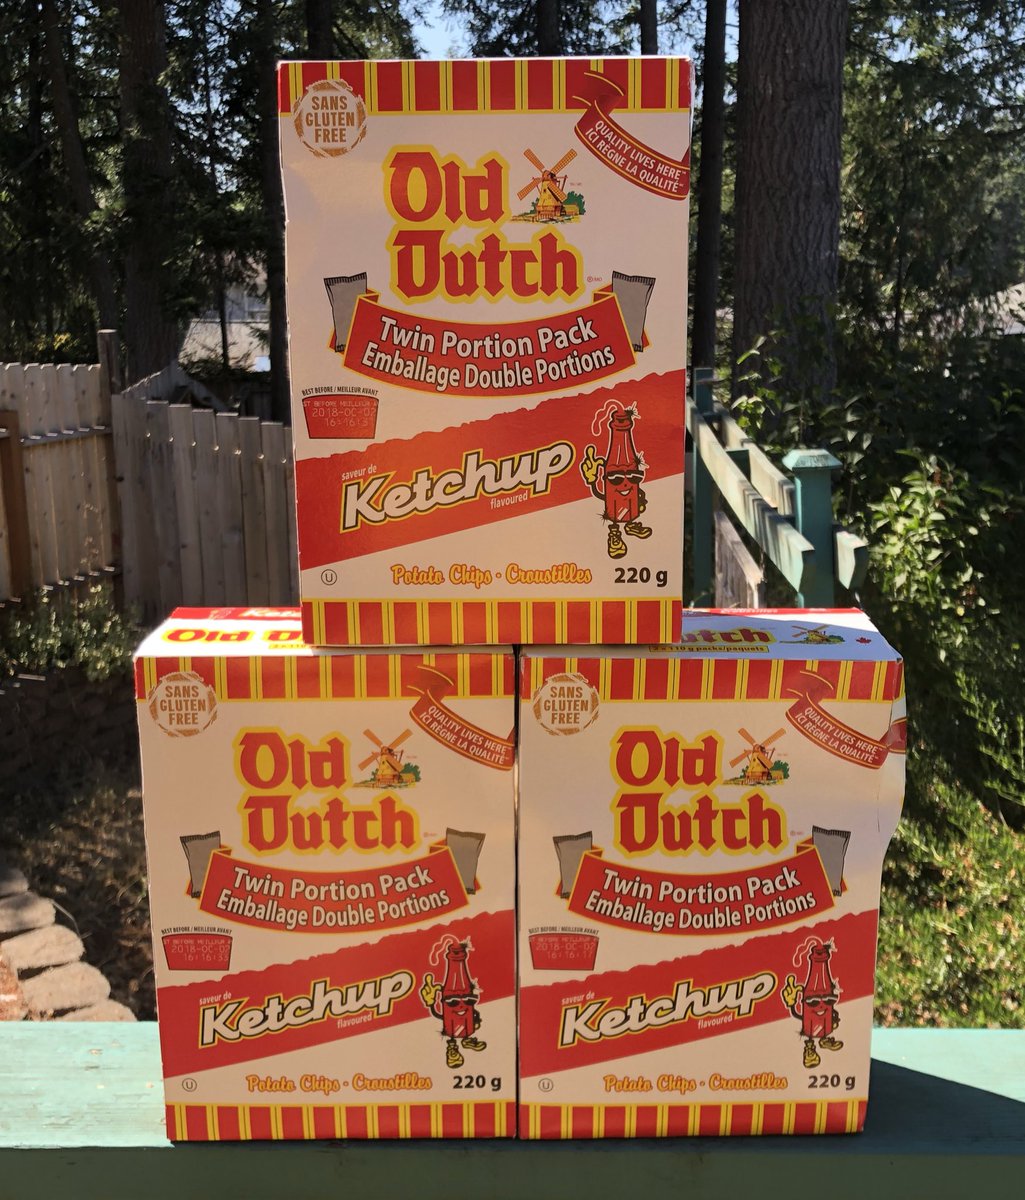 Big Thanks to my friends in #ChiefState!!! @olddutch Ketchup Chips 💯 👌🏻!!!